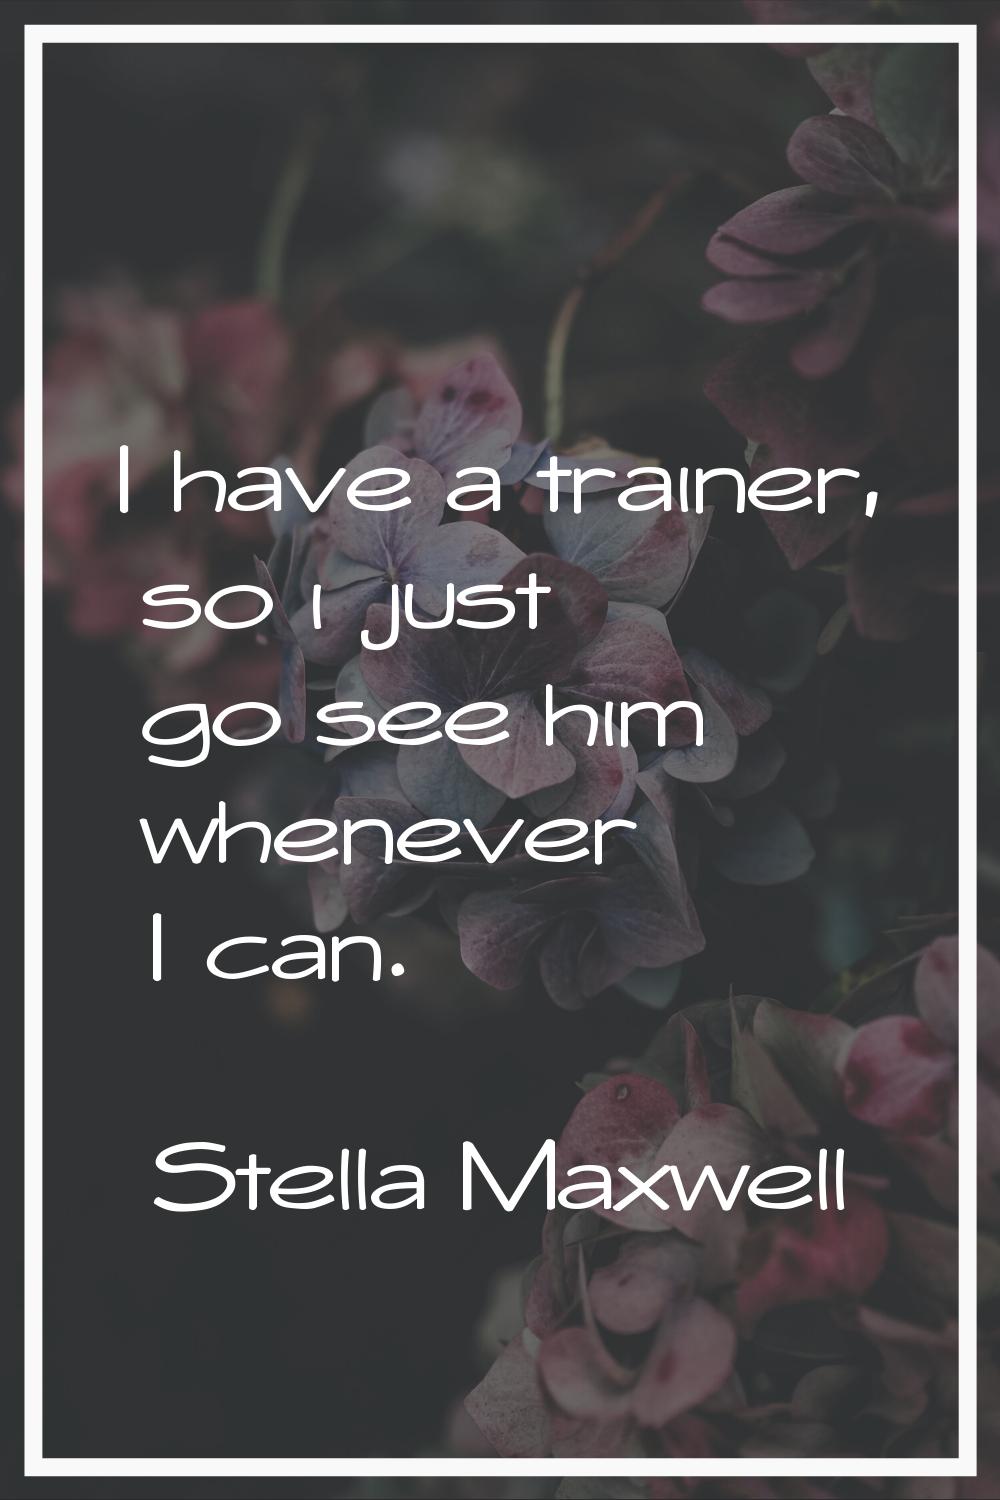 I have a trainer, so i just go see him whenever I can.